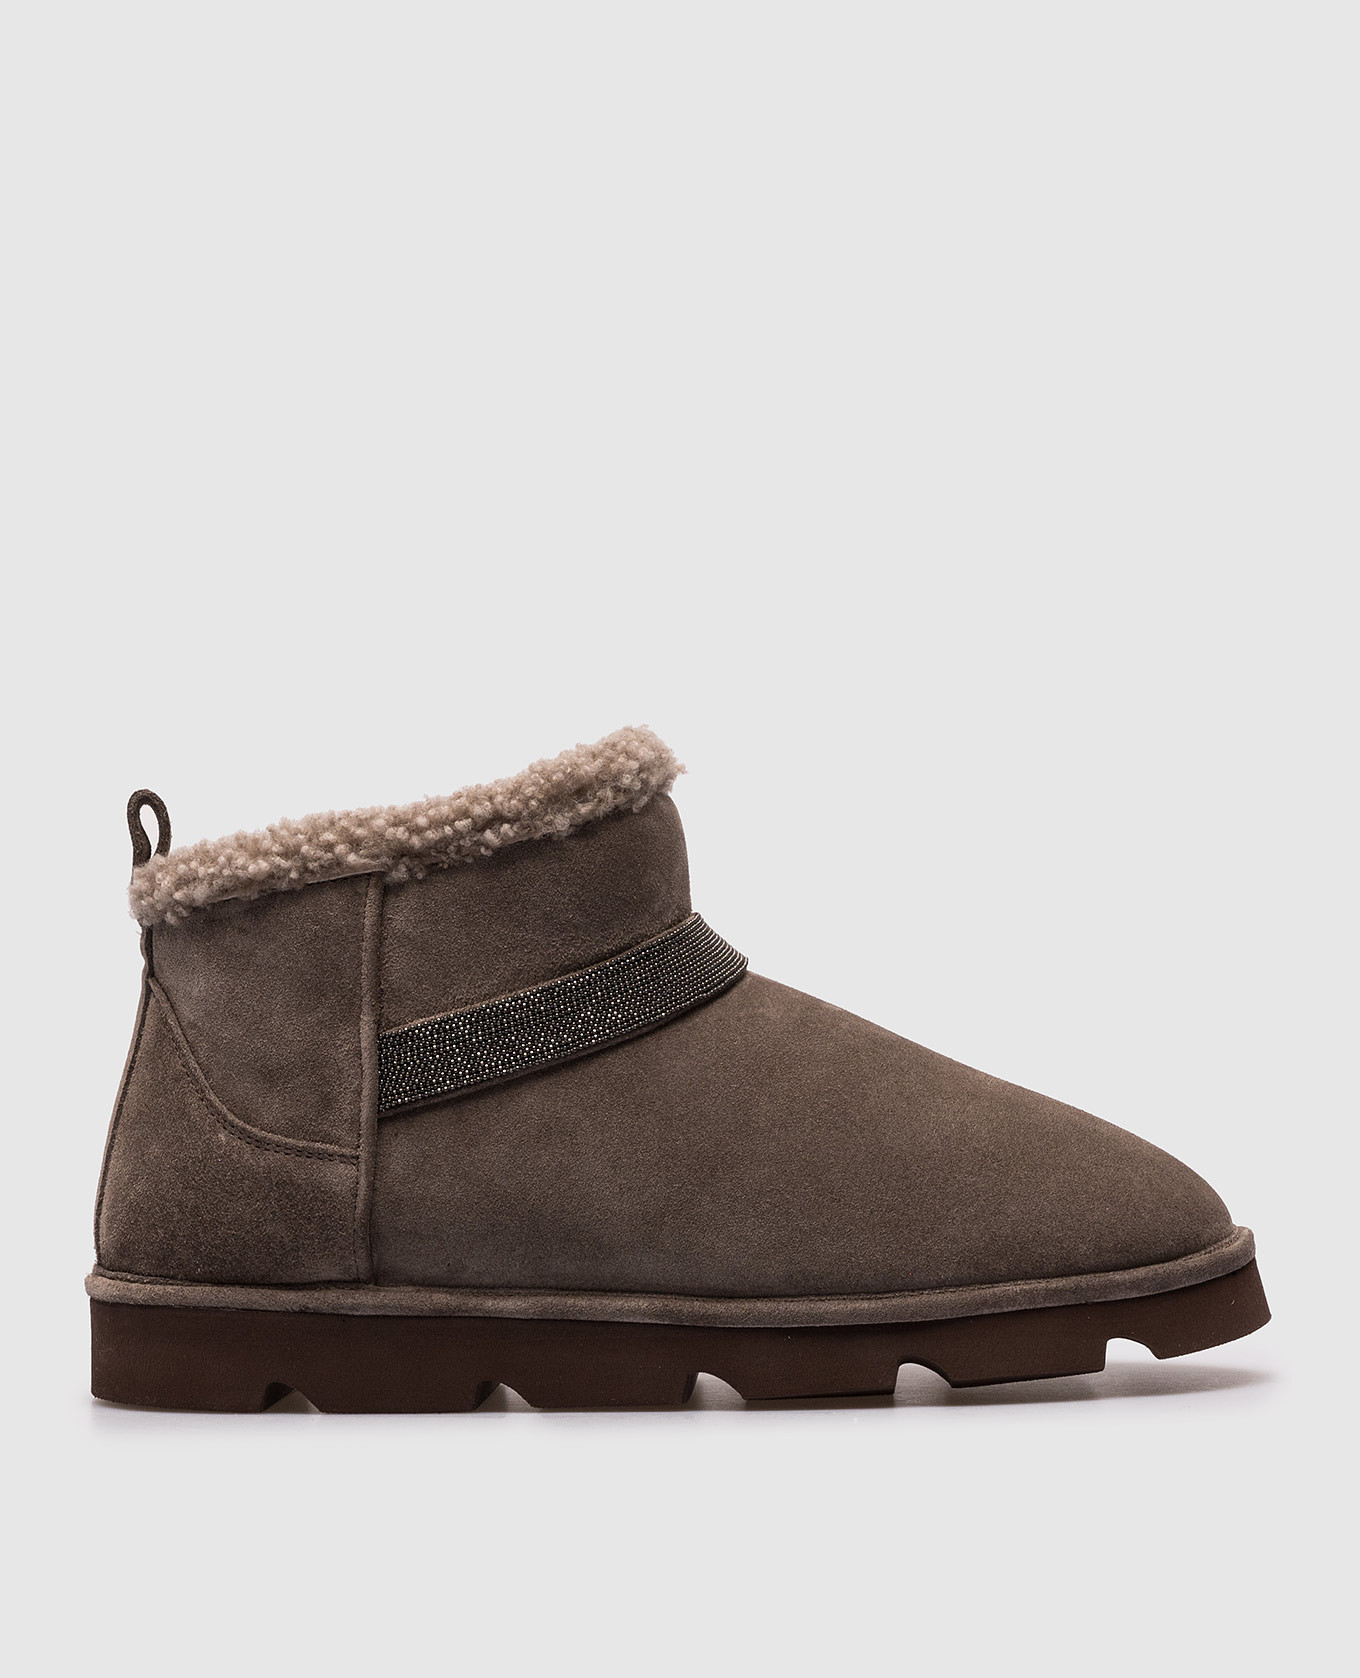 Gray suede Uggs with monil chain